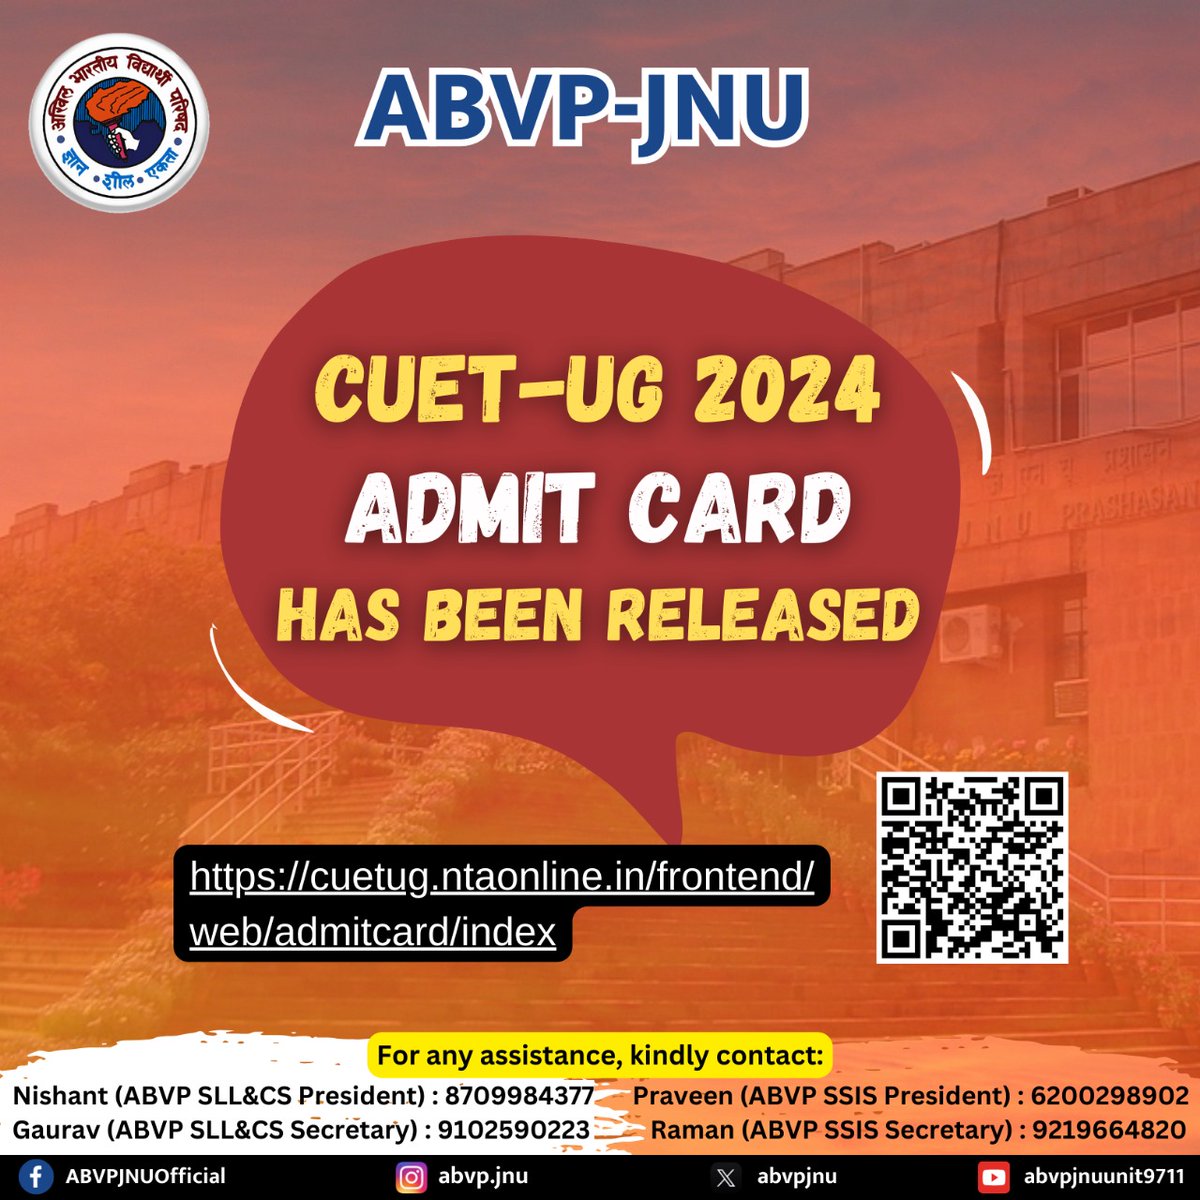 CUET-UG 2024 Admit Card has been released. Kindly visit: cuetug.ntaonline.in/frontend/web/a… to download your admit card. For any assistance, kindly contact the concerned people in the poster. #CUET #ABVP